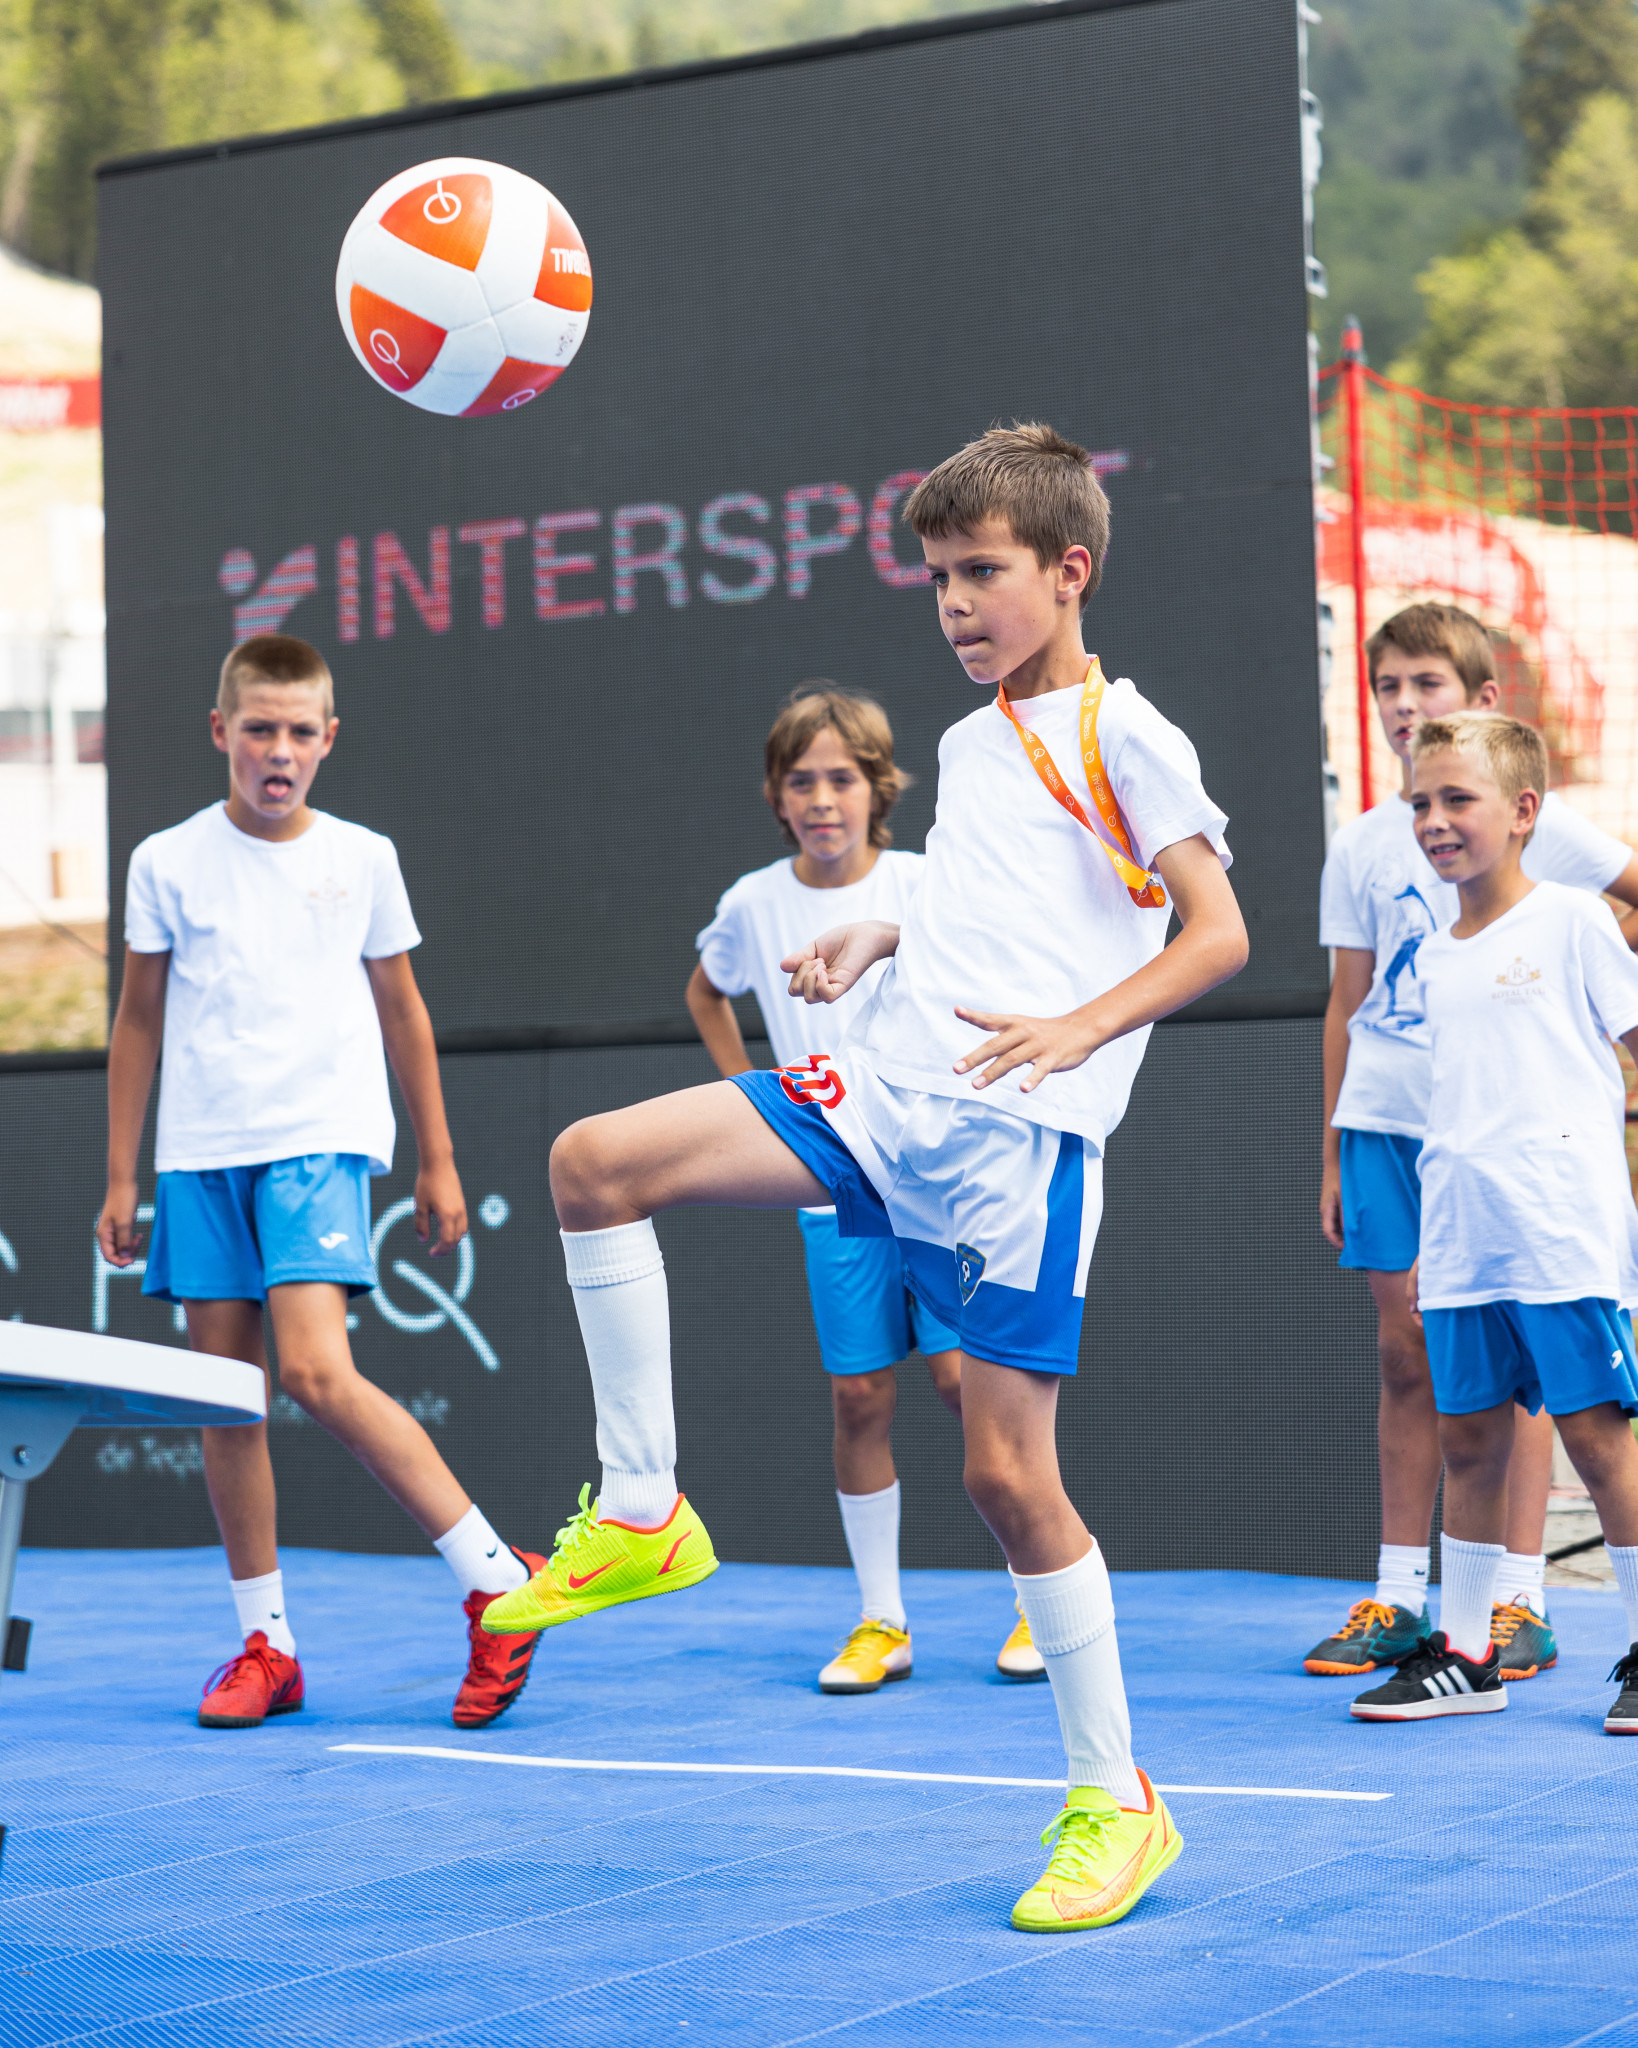 Youth players from the local football club were introduced to teqball through a come-and-try event ©FITEQ